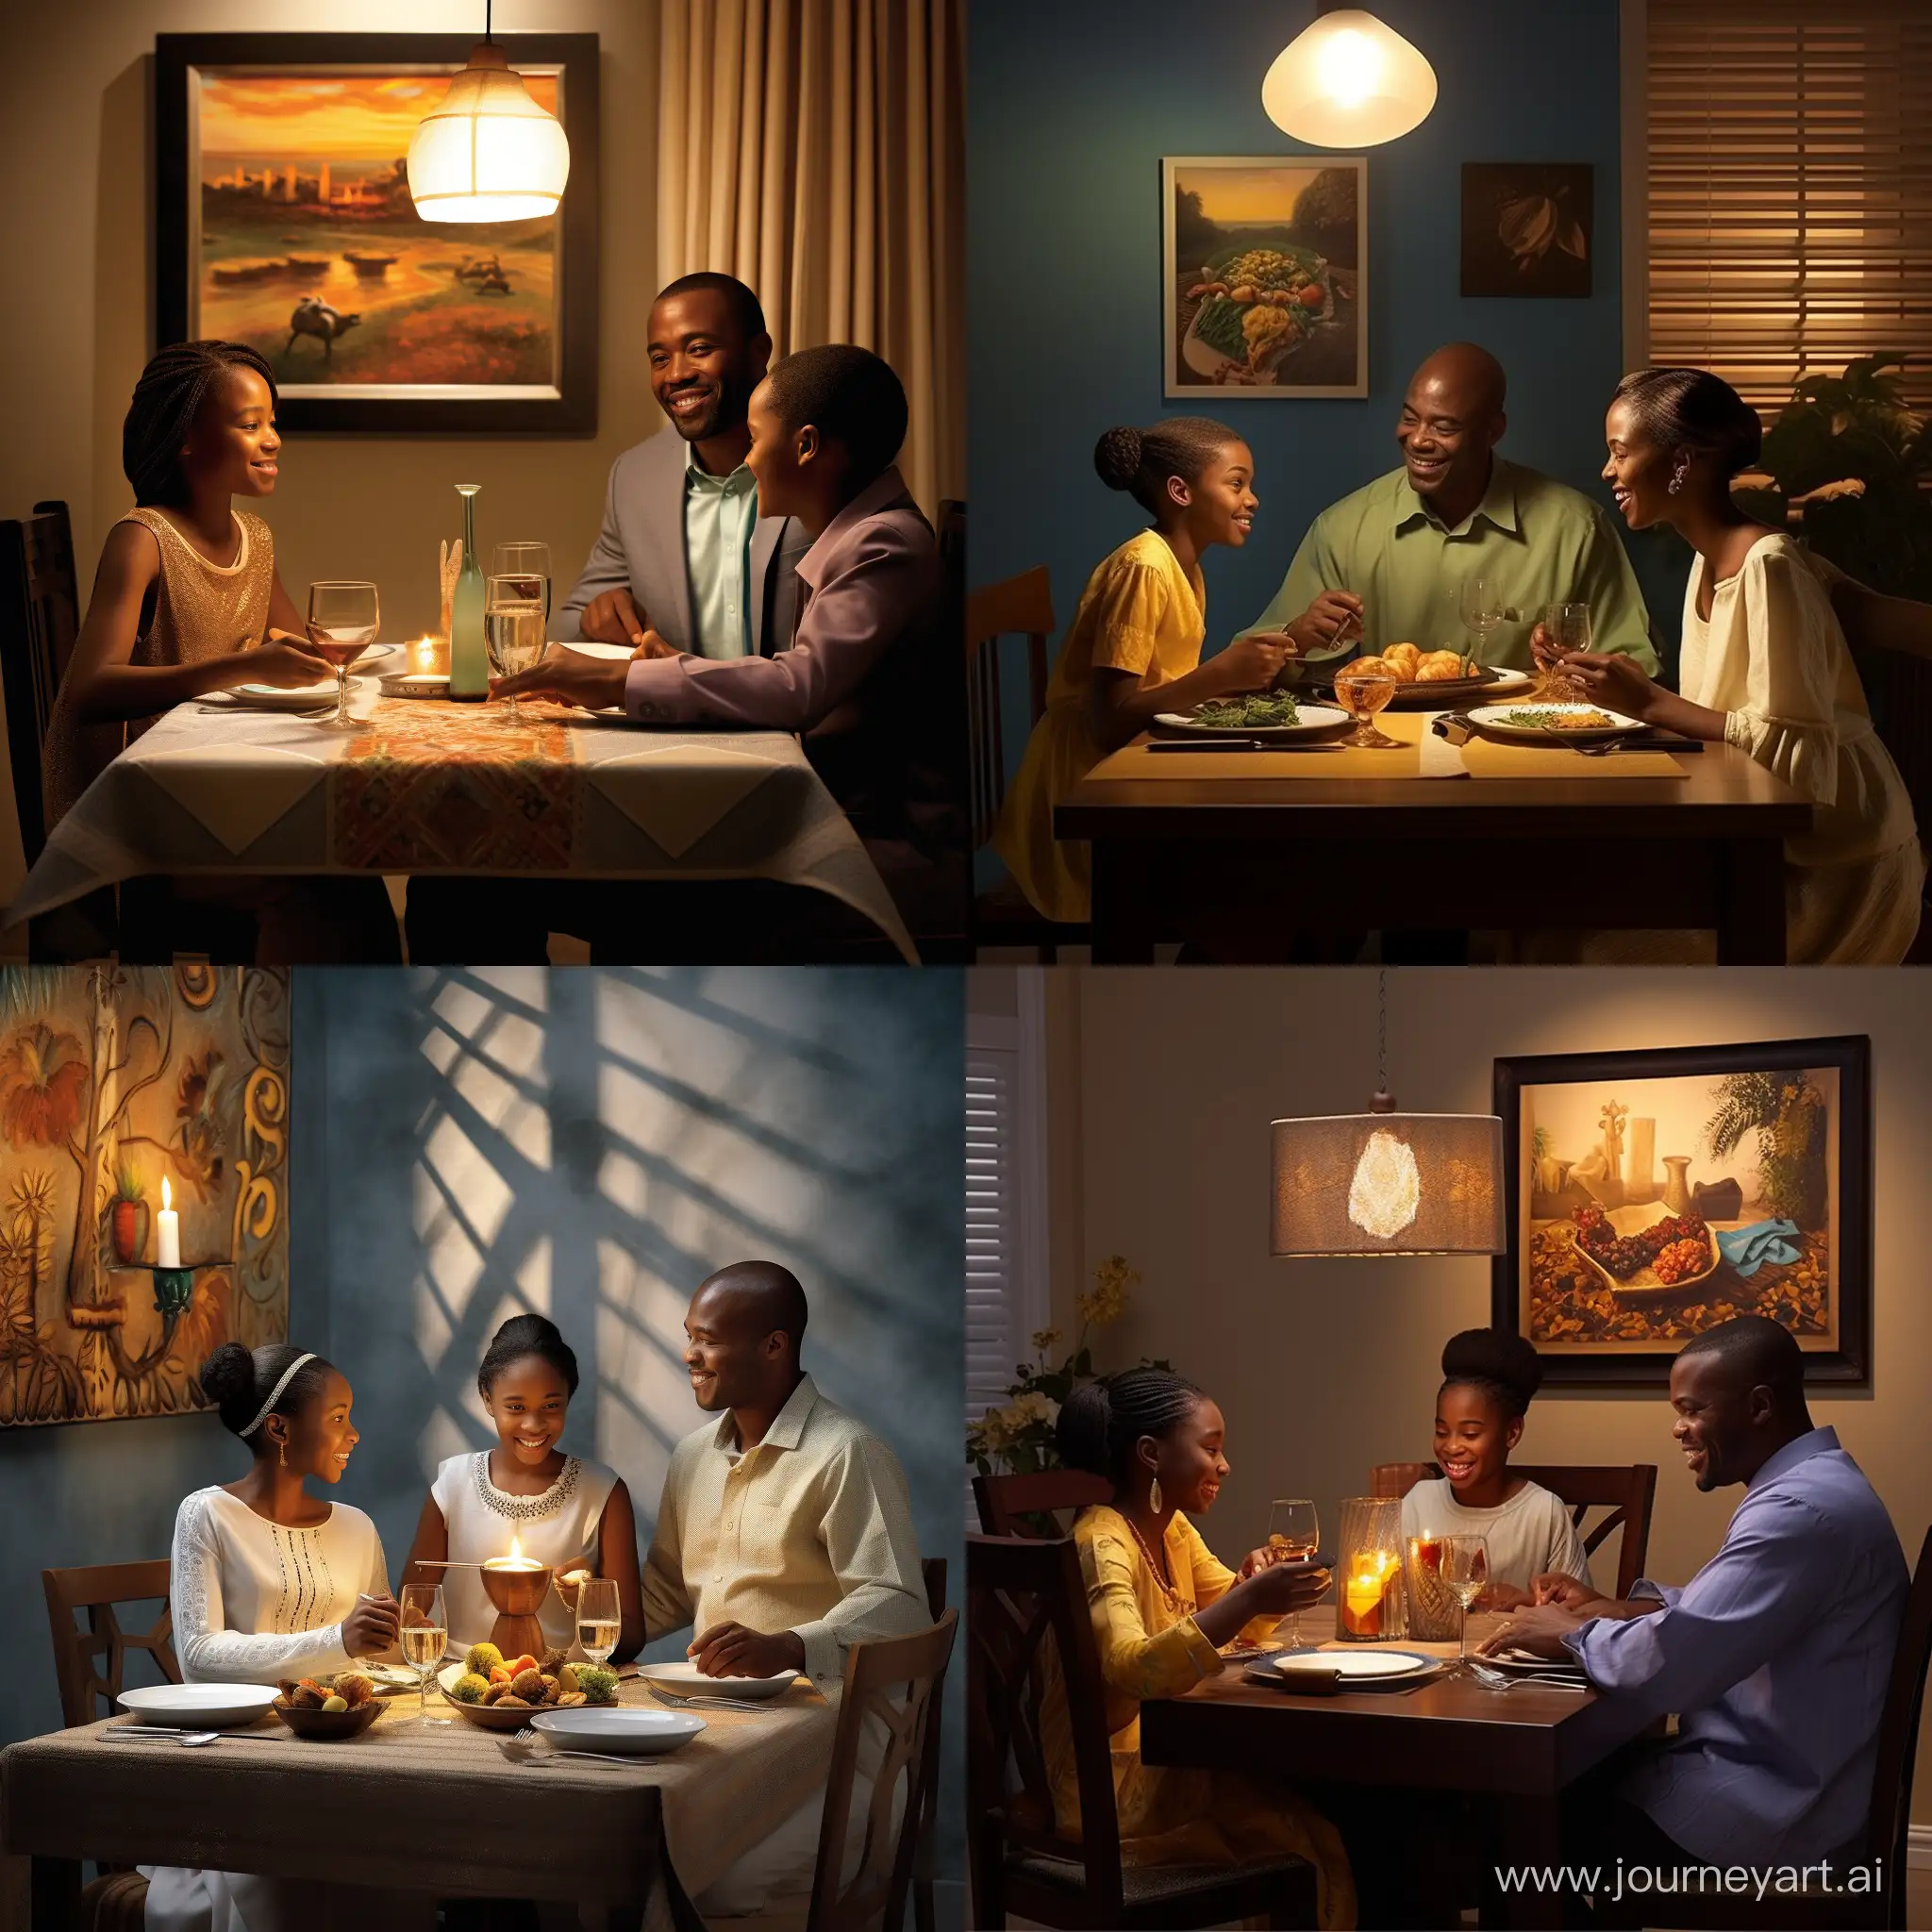 Joyful-African-Family-Dining-Together-in-Serene-Ice-Blue-Ambiance